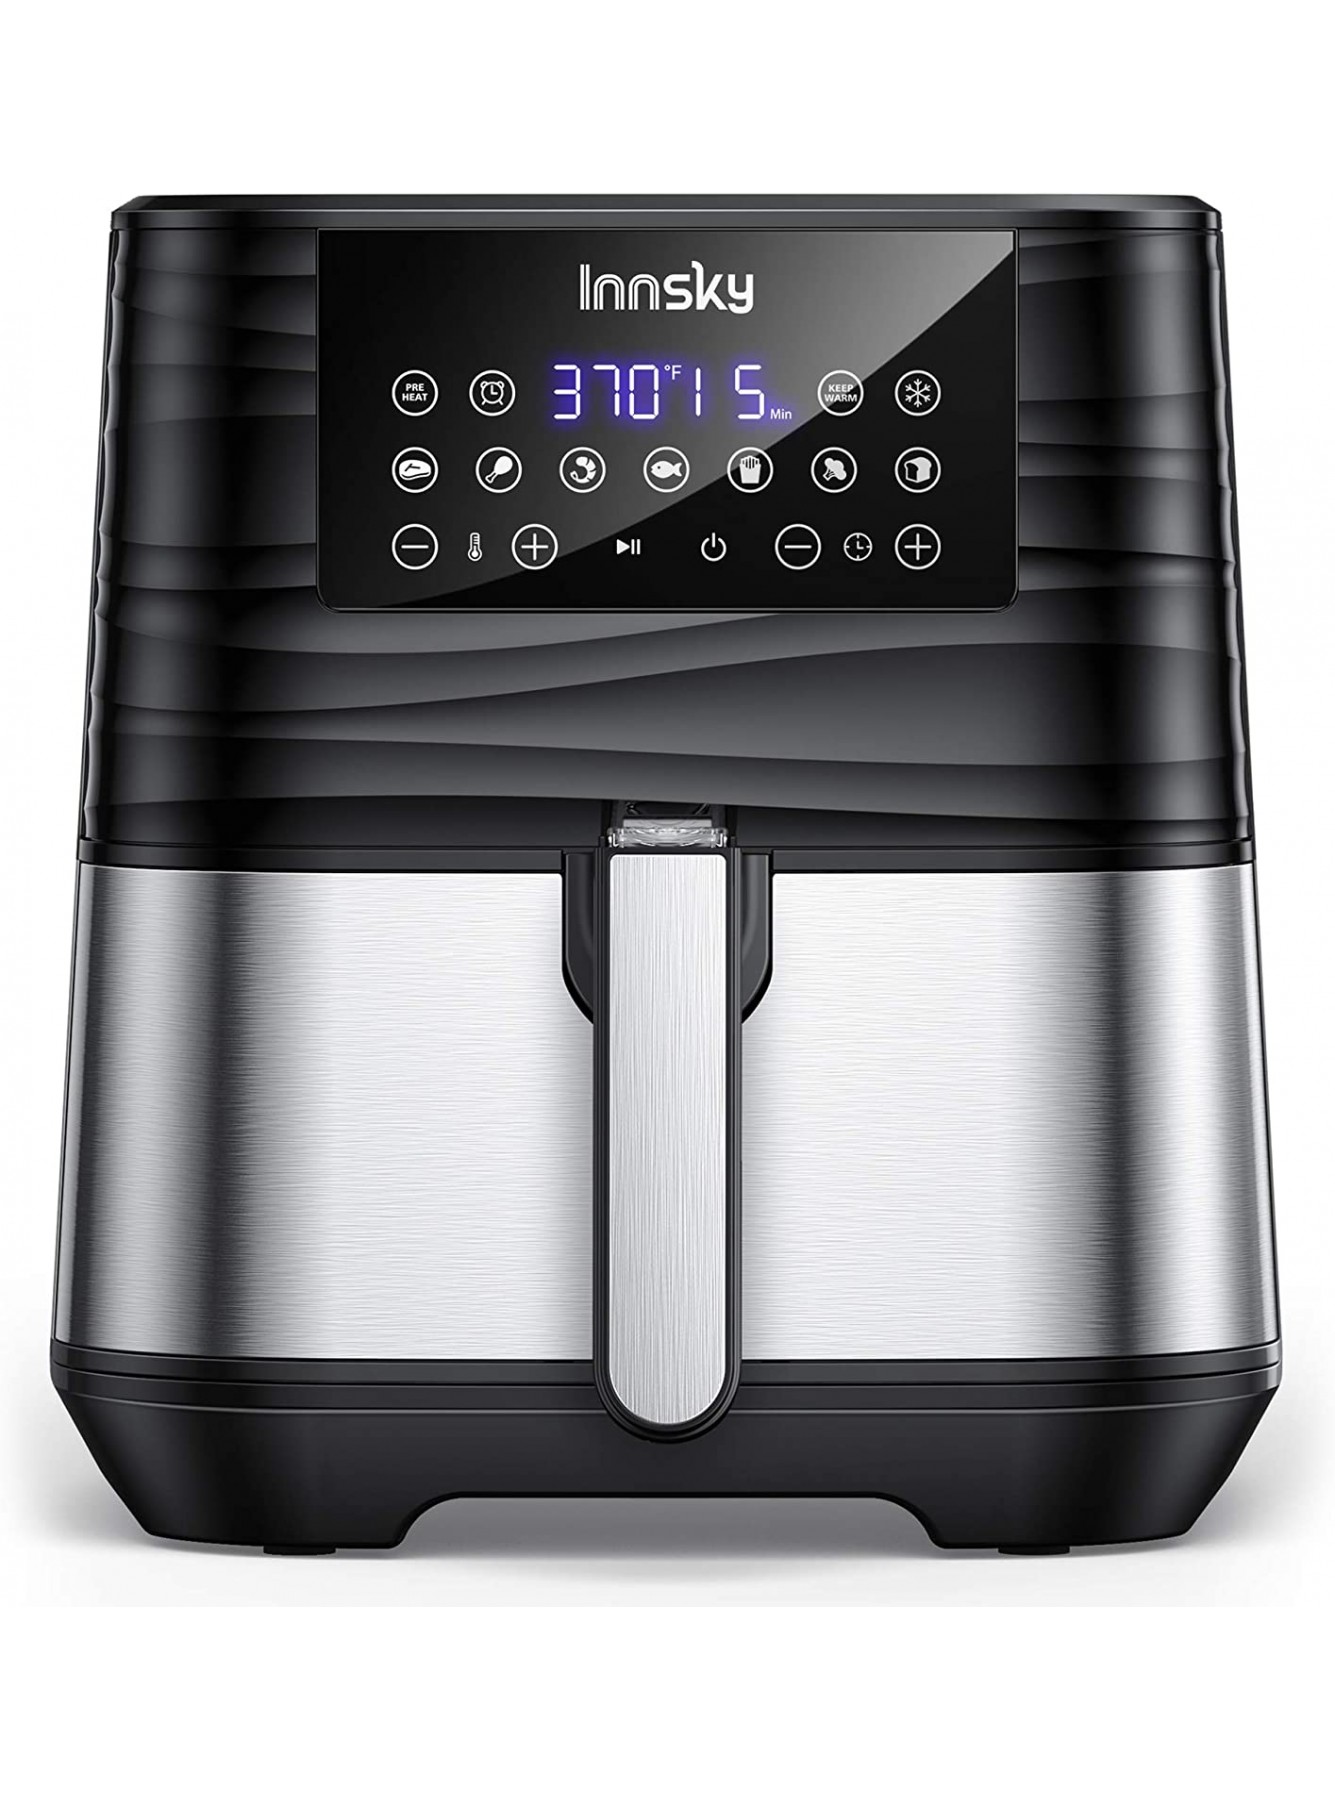 Innsky Air Fryer XL 5.8 QT 【2022 Upgraded】 11 in 1 Oilless Air Fryers Oven Easy One Touch Screen with Preheat & Delay Start ETL Listed Airfryer 1700W for Air Fry Roast Bake Grill Recipe Book B07MR3KWSL